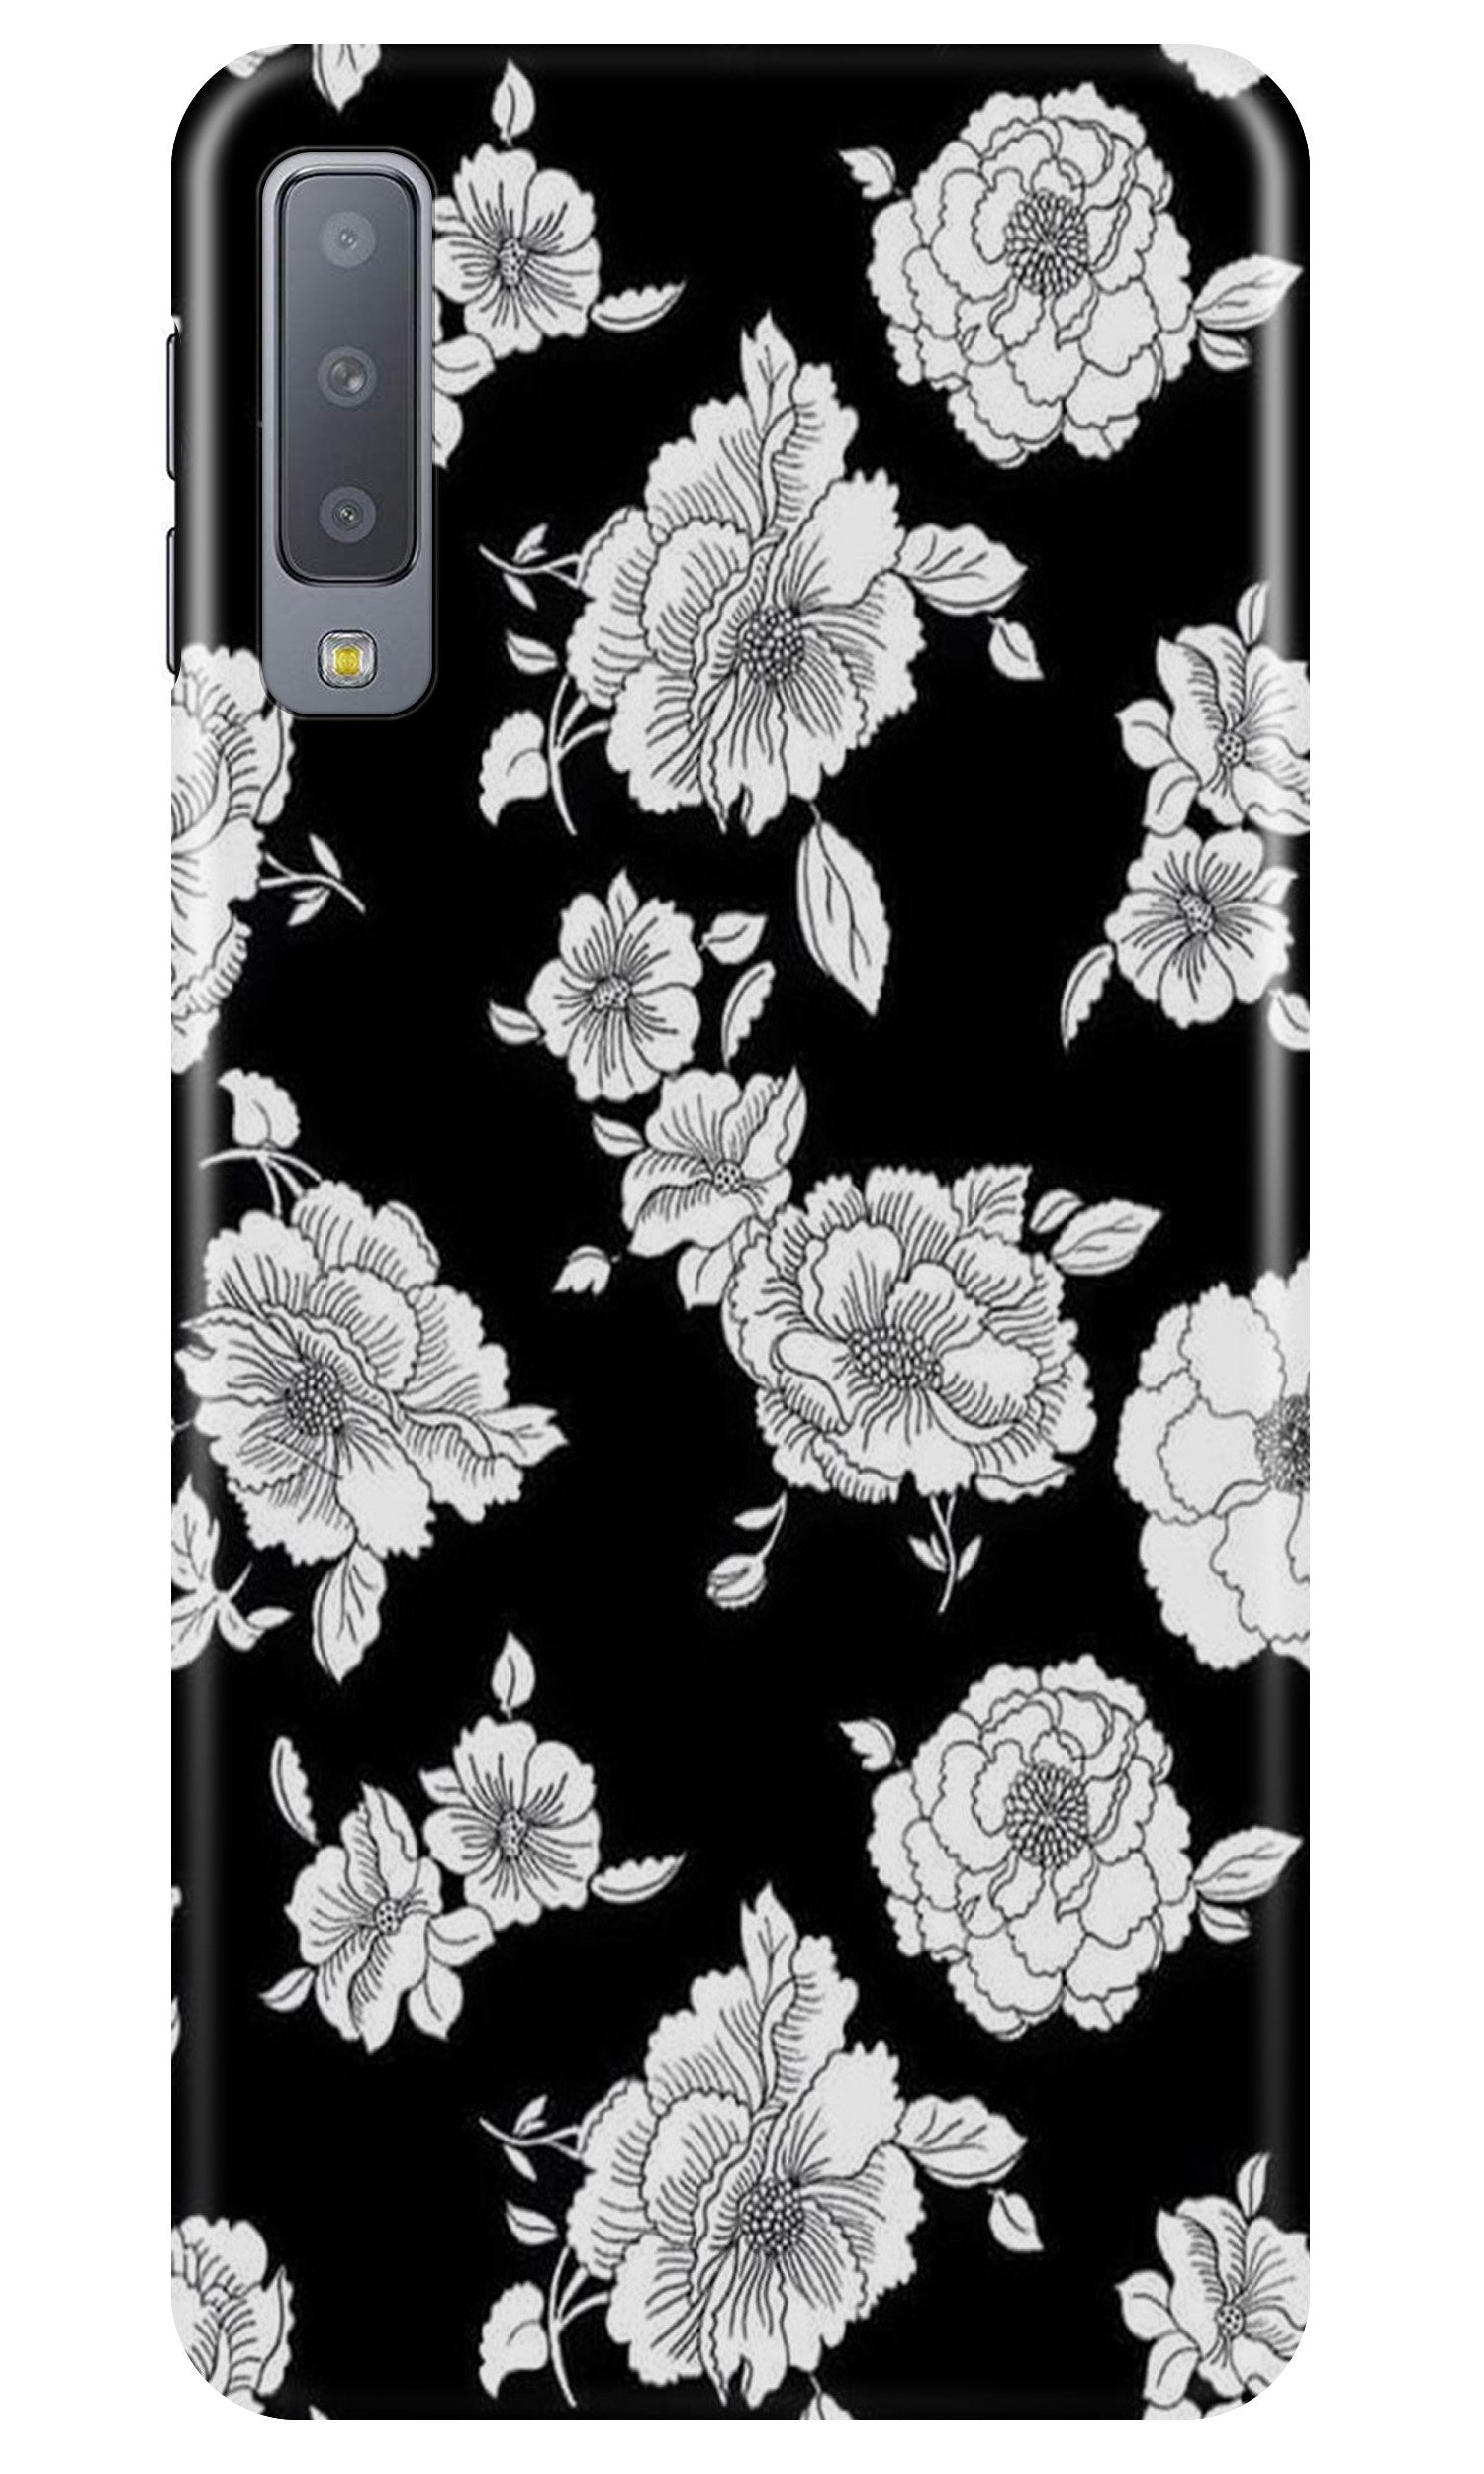 White flowers Black Background Case for Galaxy A7 (2018)